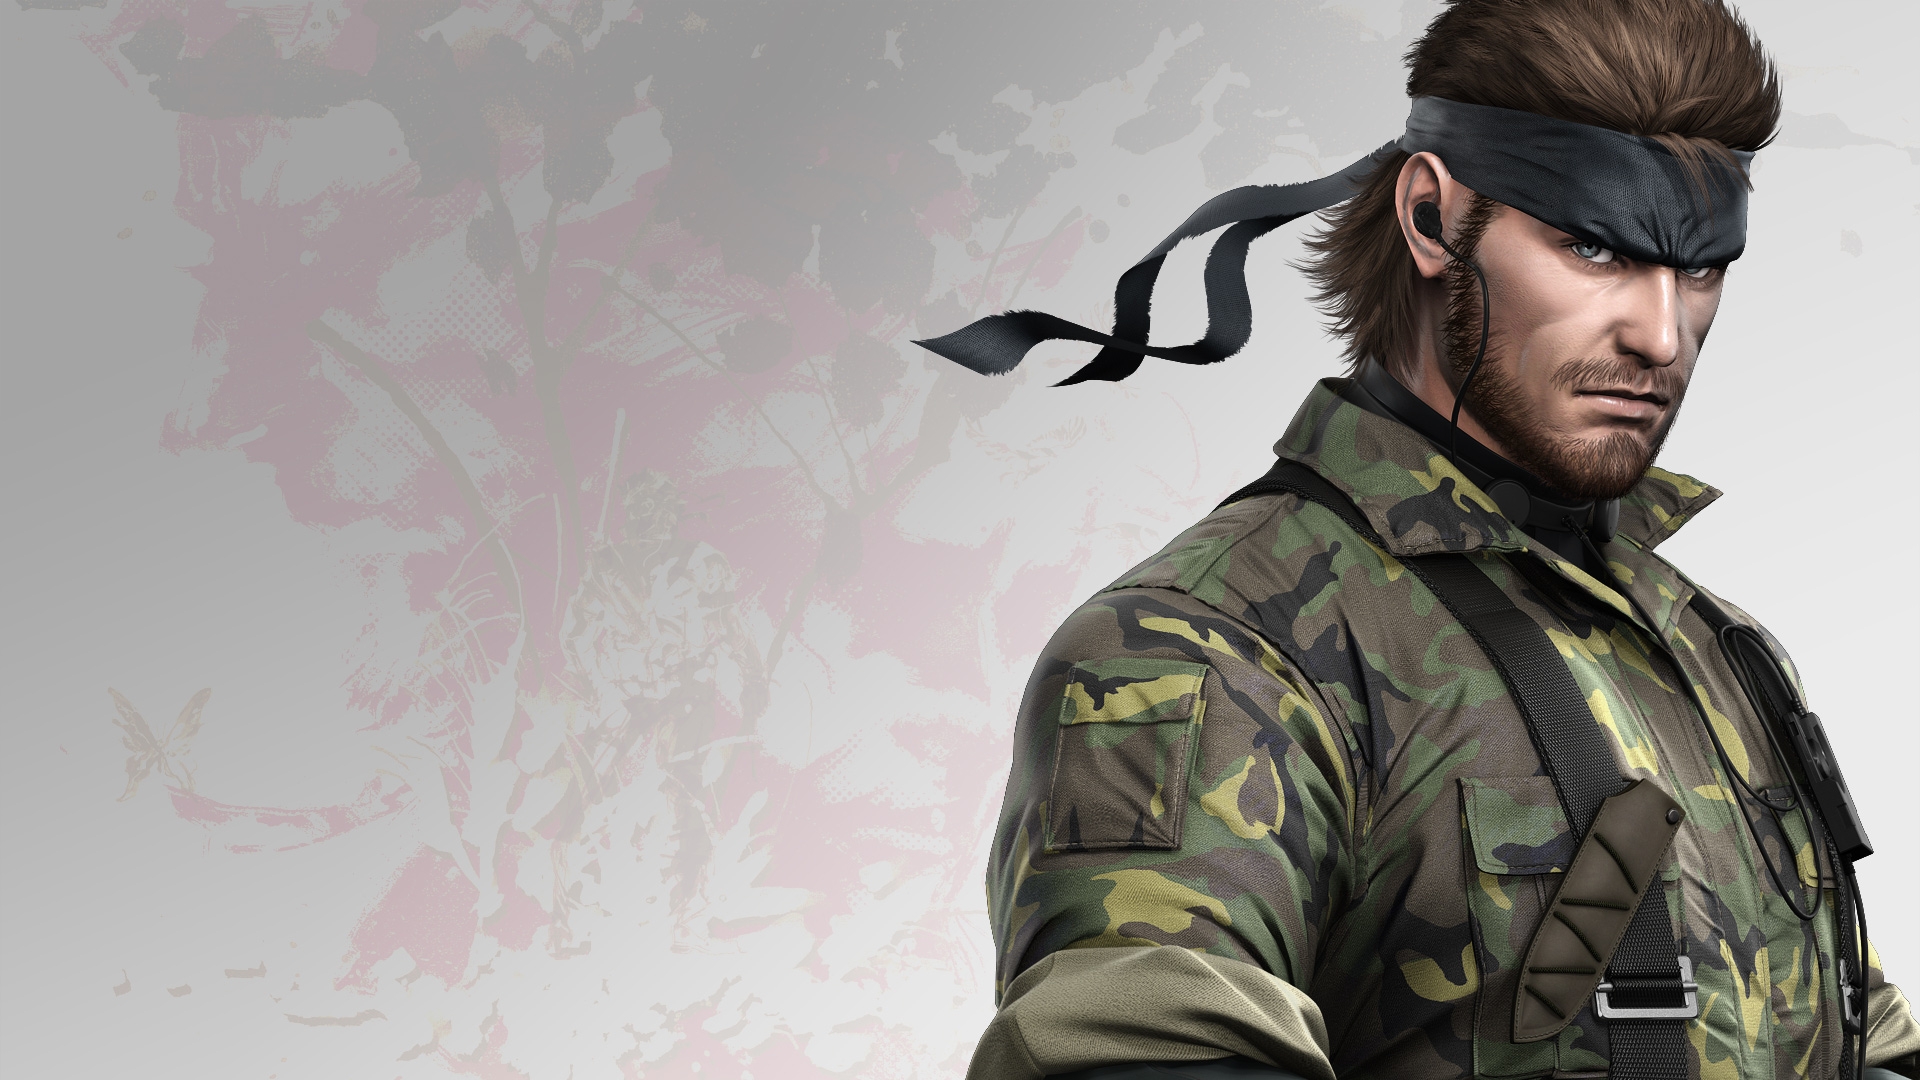 Free Download Metal Gear Solid Snake Hd Wallpaper 19x1080 For Your Desktop Mobile Tablet Explore 76 Mgs Wallpaper Metal Gear Solid 3 Wallpaper Metal Gear Solid Desktop Wallpaper Metal Gear Solid 5 Wallpaper